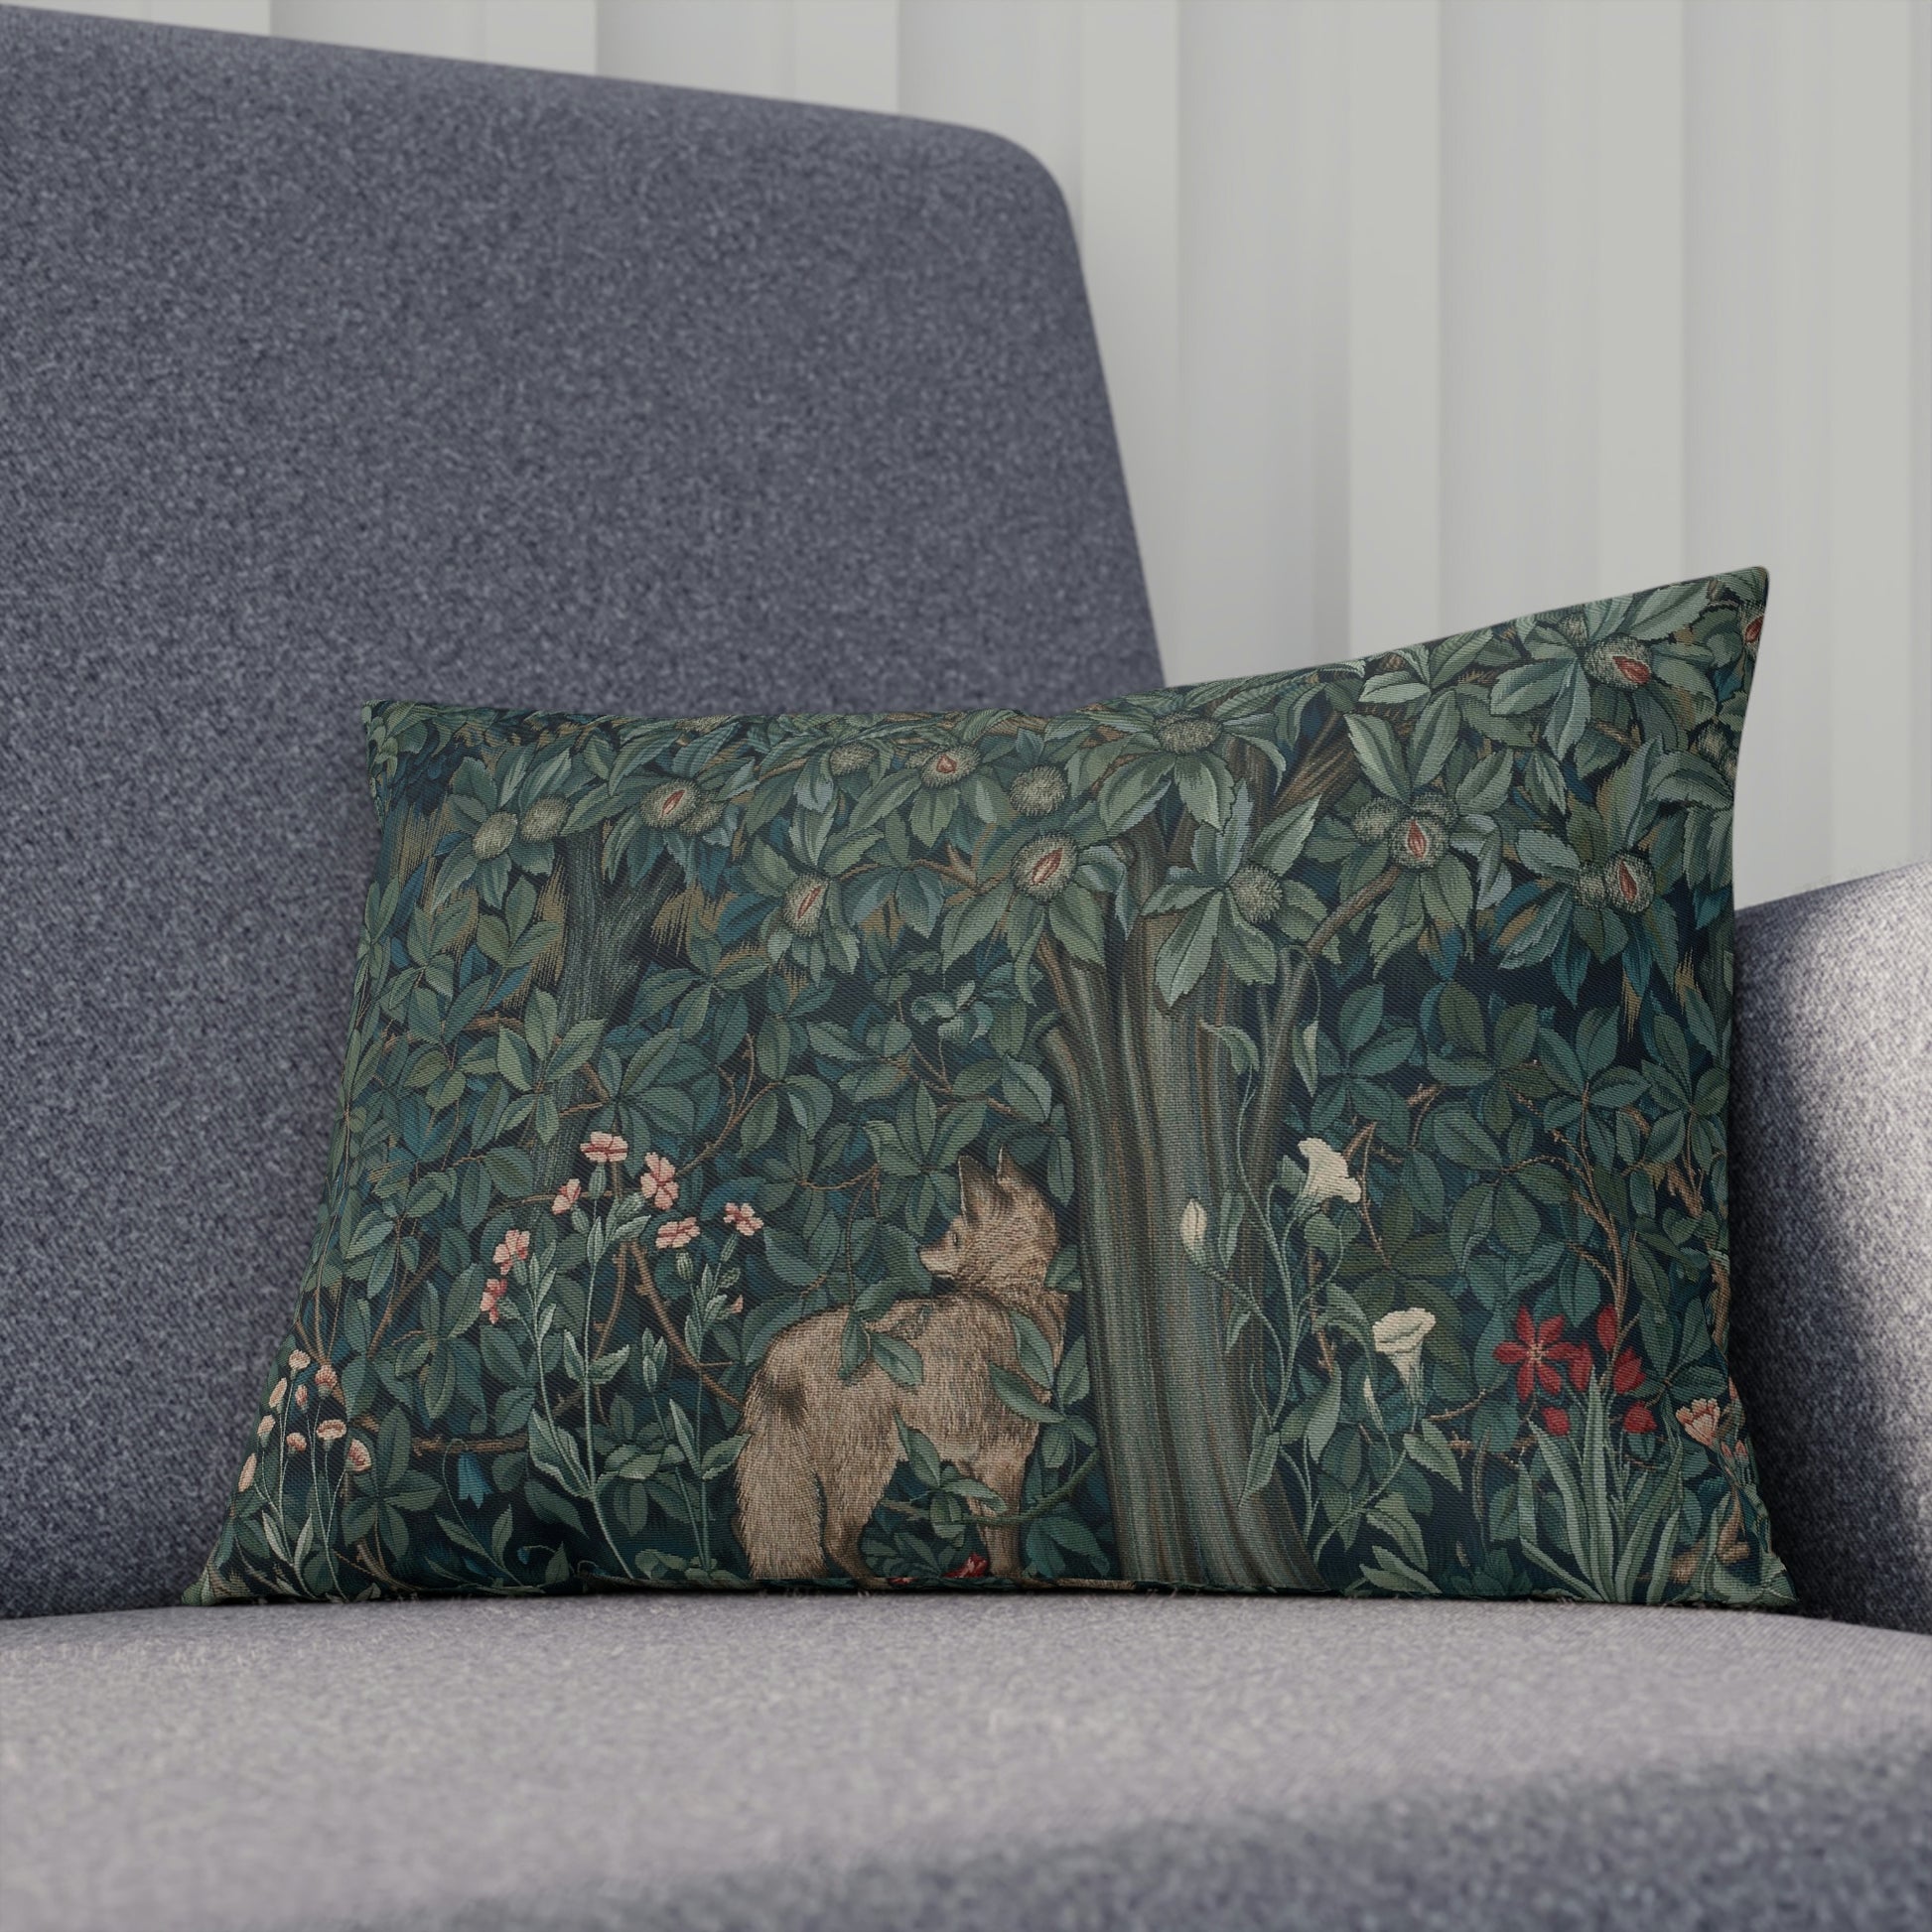 William-Morris-and-Co-Cushion-and-Cushion-Cover-Fox-by-John-Henry-Dearle-Green-Forest-Collection-15